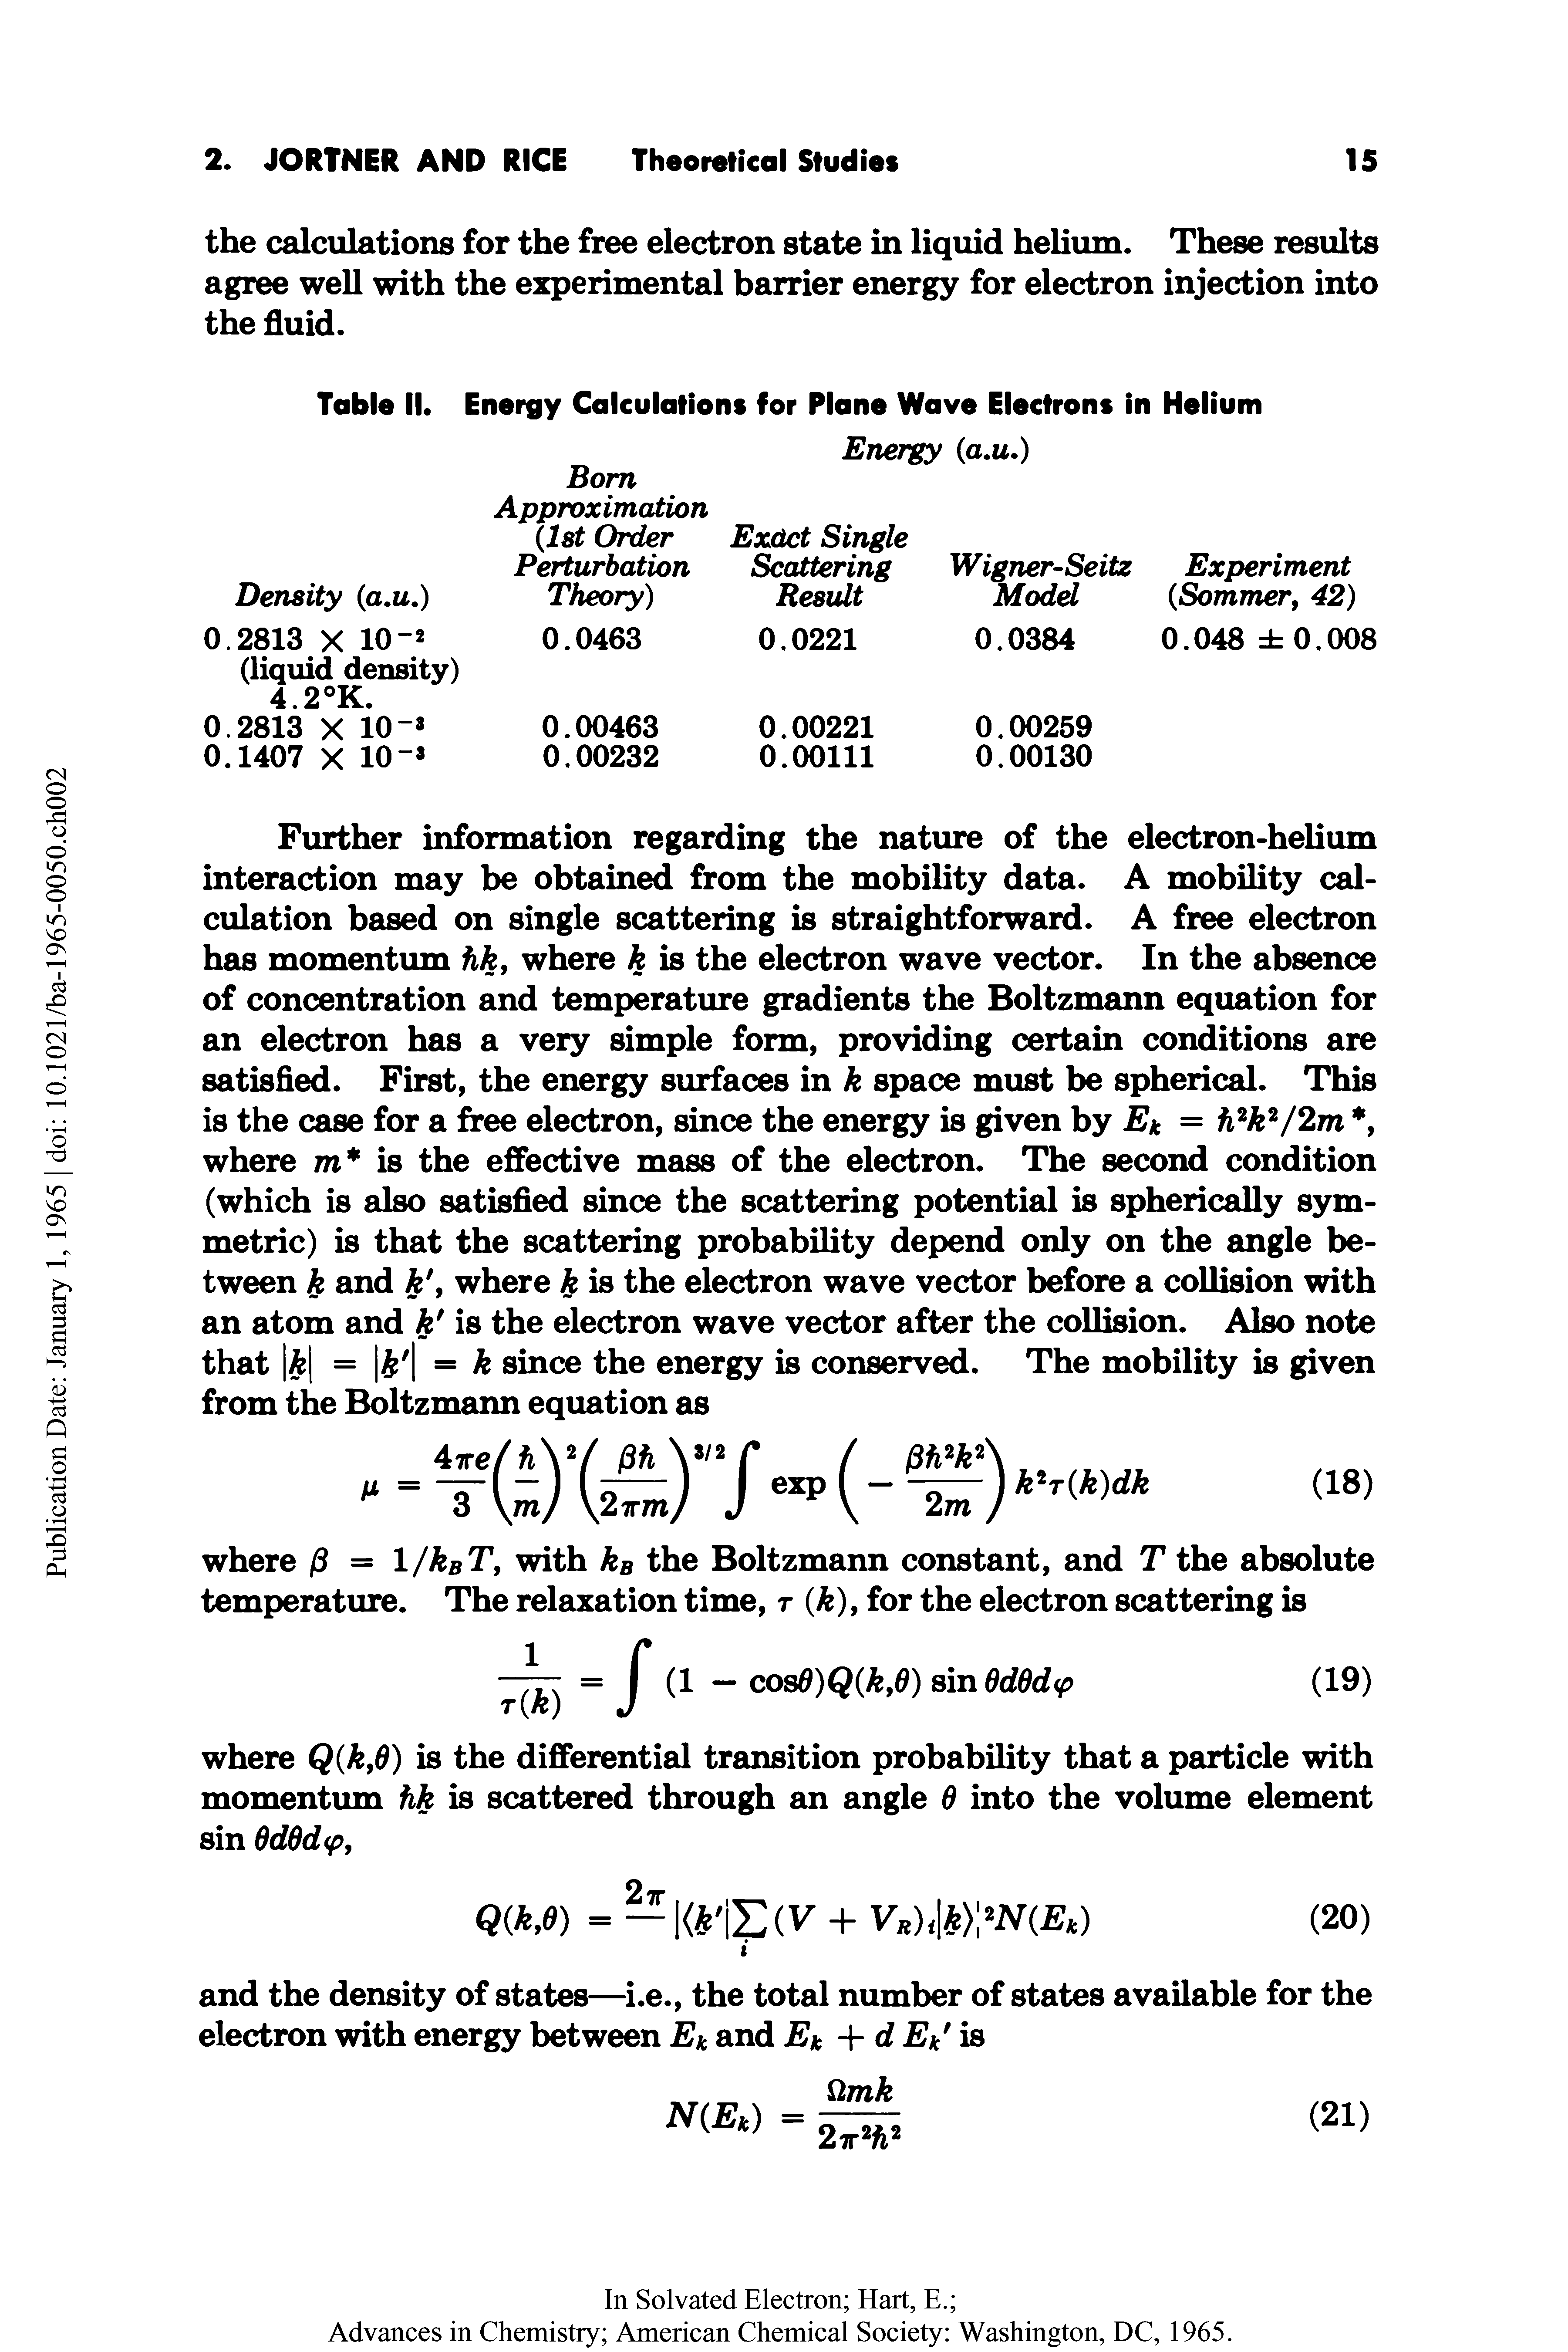 Table II. Energy Calculations for Plane Wave Electrons in Helium...